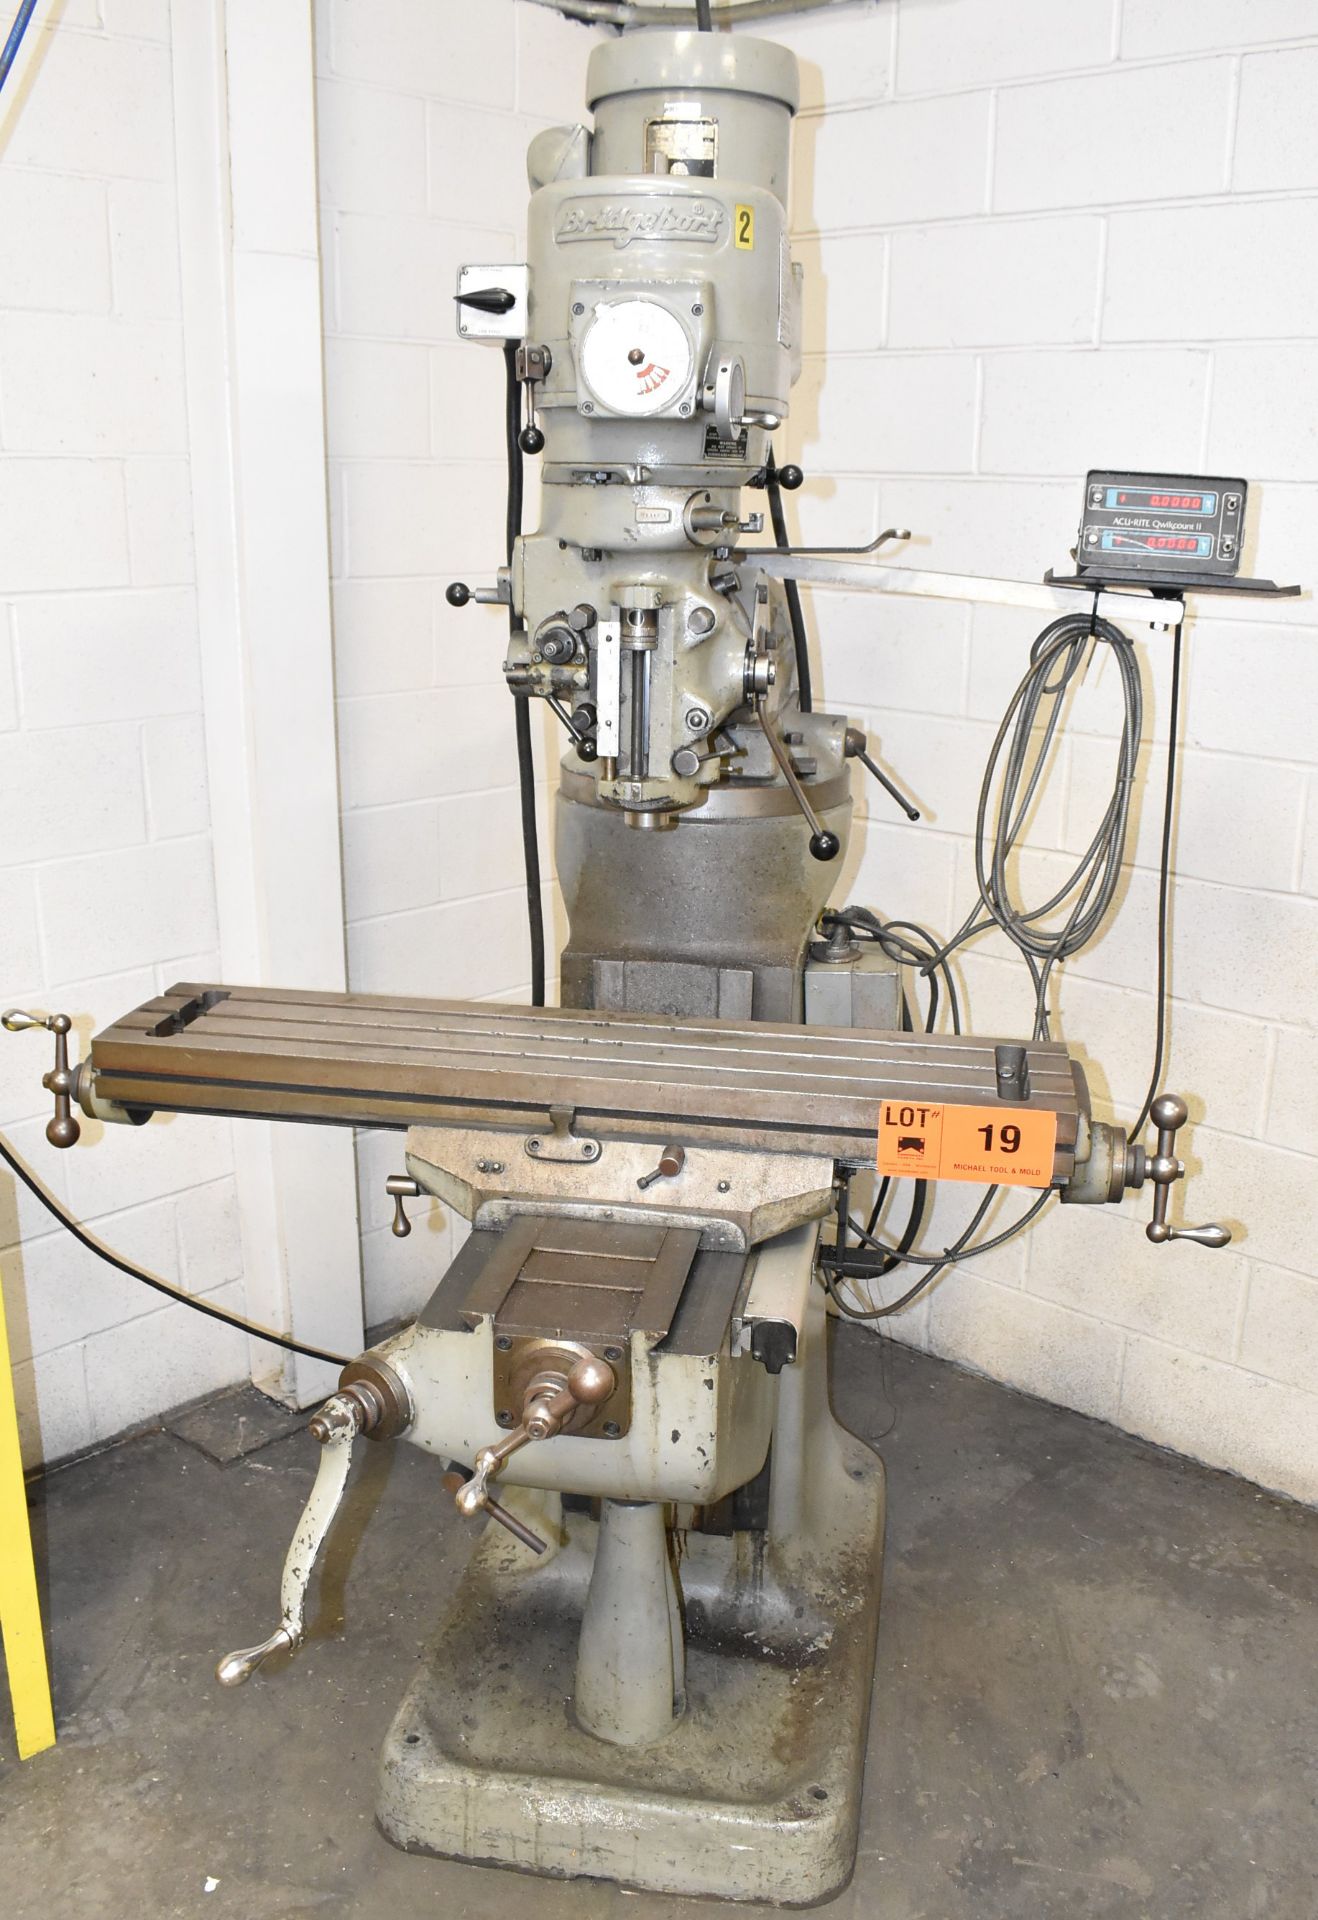 BRIDGEPORT 70745 VERTICAL MILLING MACHINE WITH 42" X 9" TABLE, SPEEDS TO 4,200 RPM, ACU-RITE - Image 2 of 8